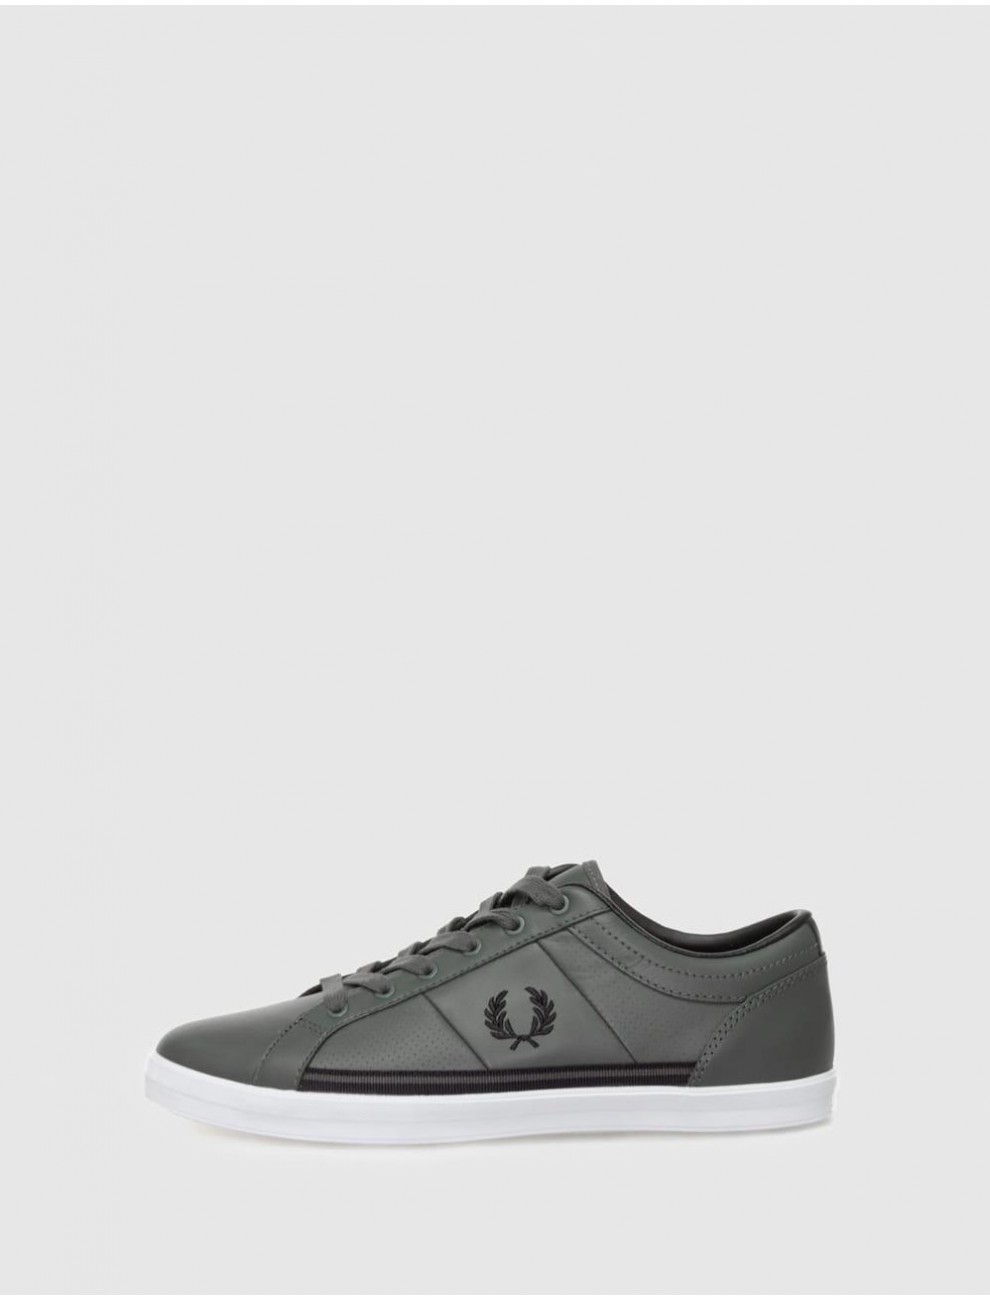 Zapatilla Fred Perry B4331 Baseline Perf Leather Verde | Kamomeshop.es